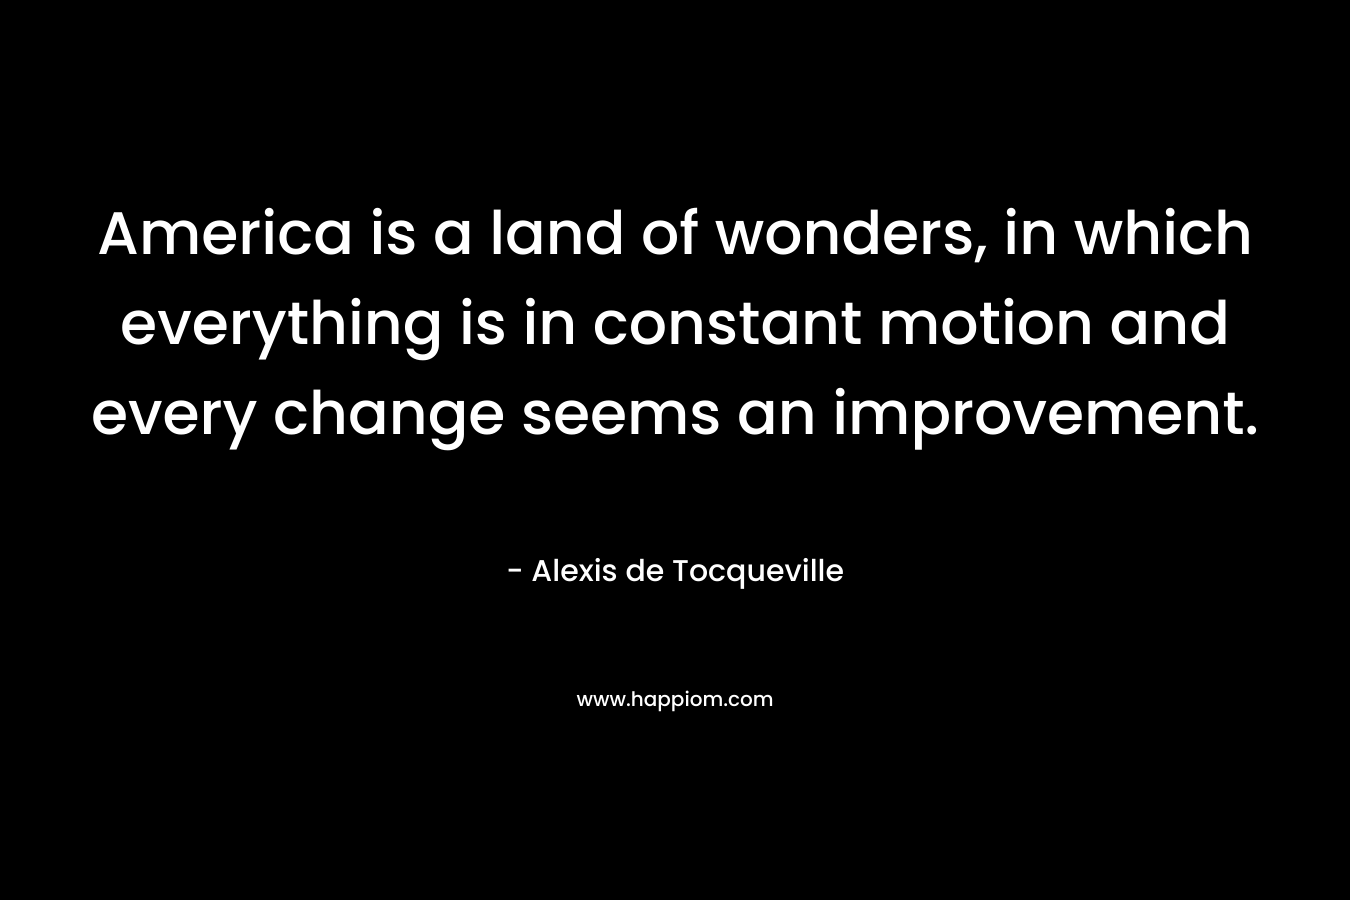 America is a land of wonders, in which everything is in constant motion and every change seems an improvement. – Alexis de Tocqueville